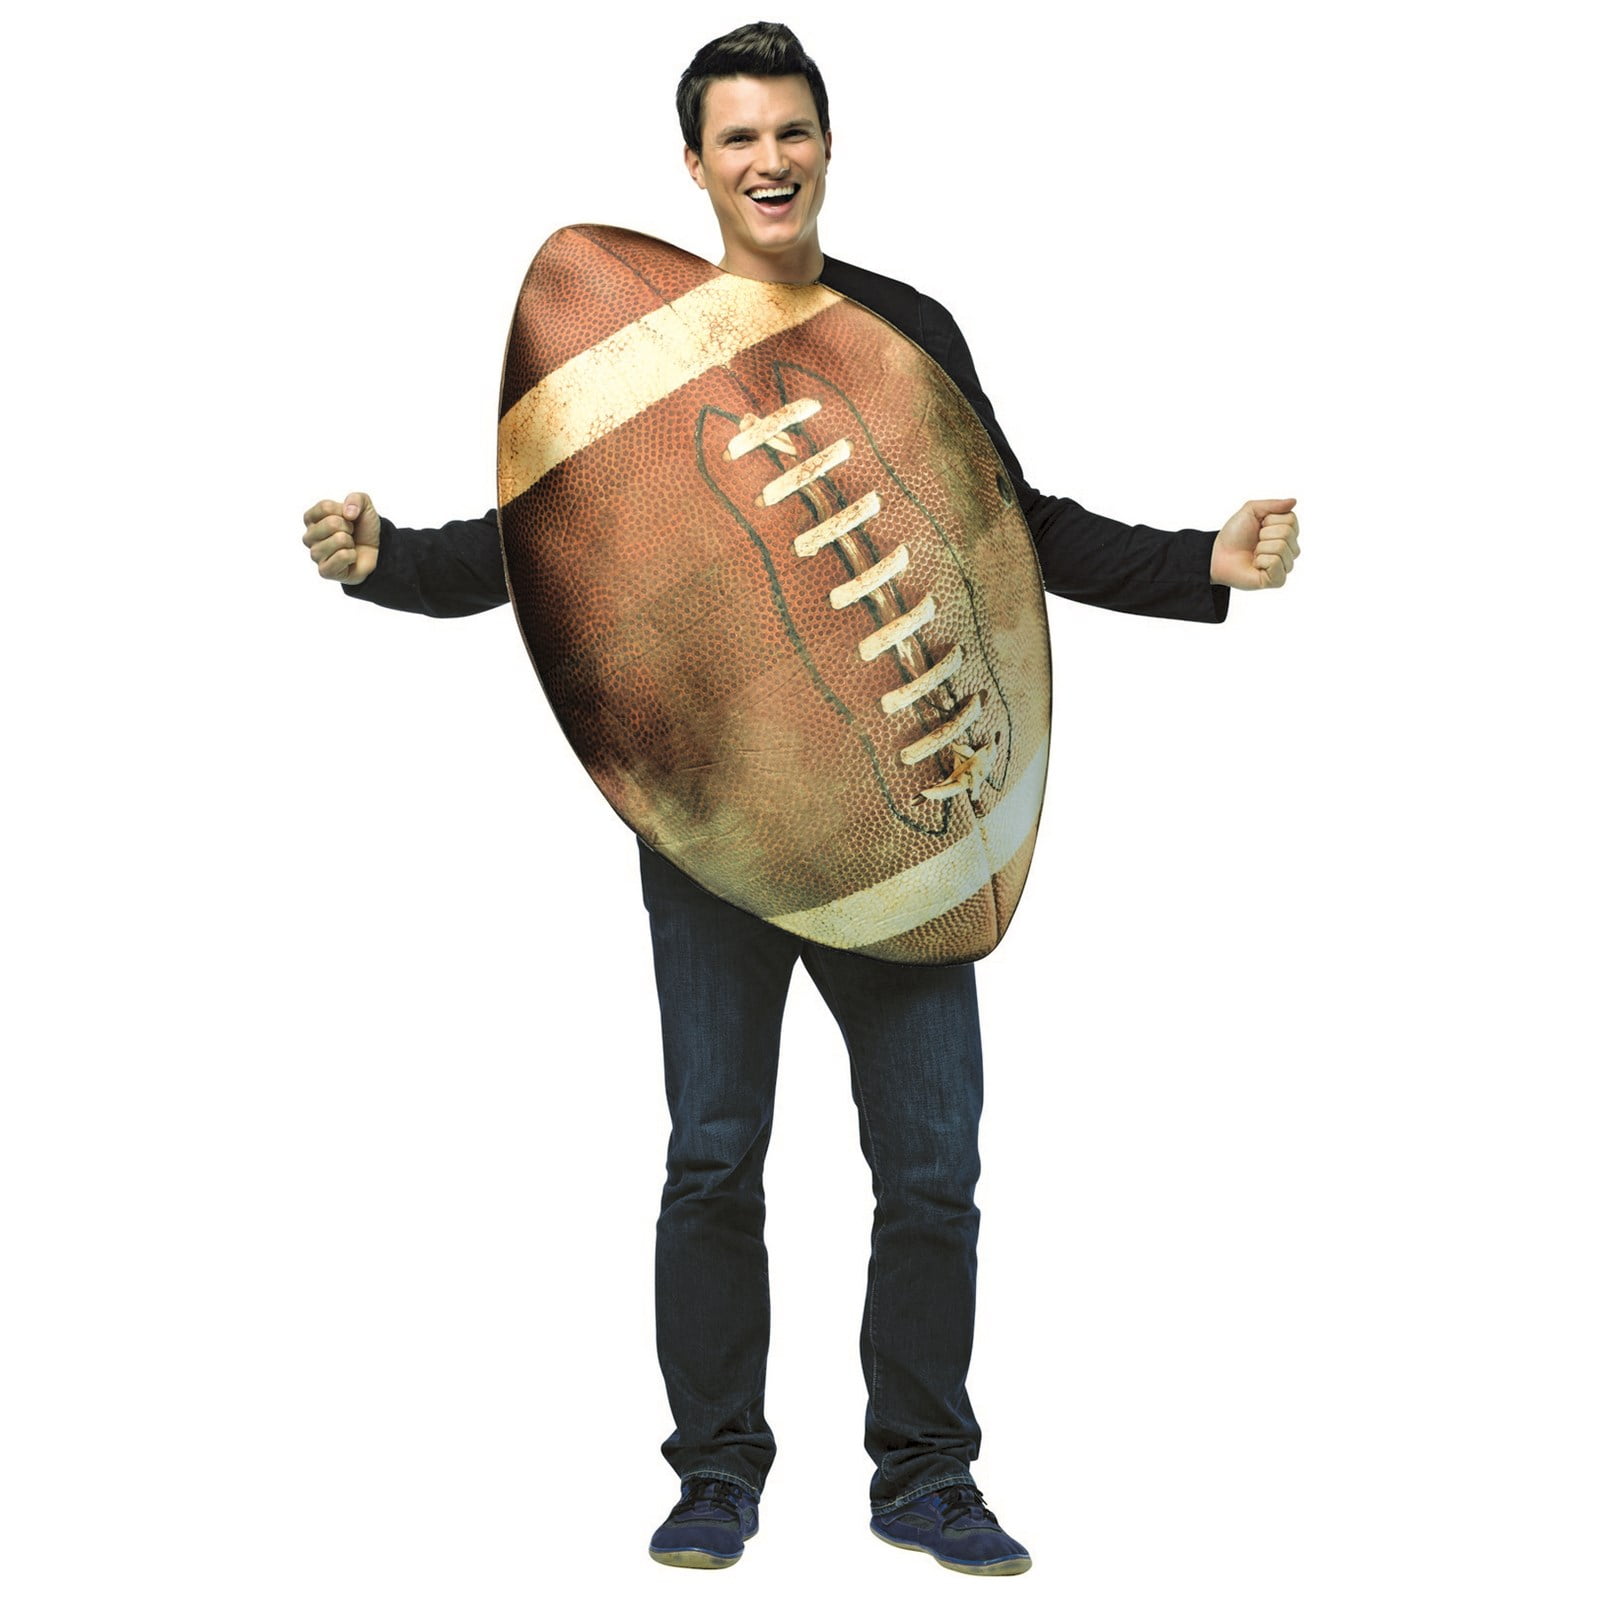 Soccer Ball Costume, Adult One Size